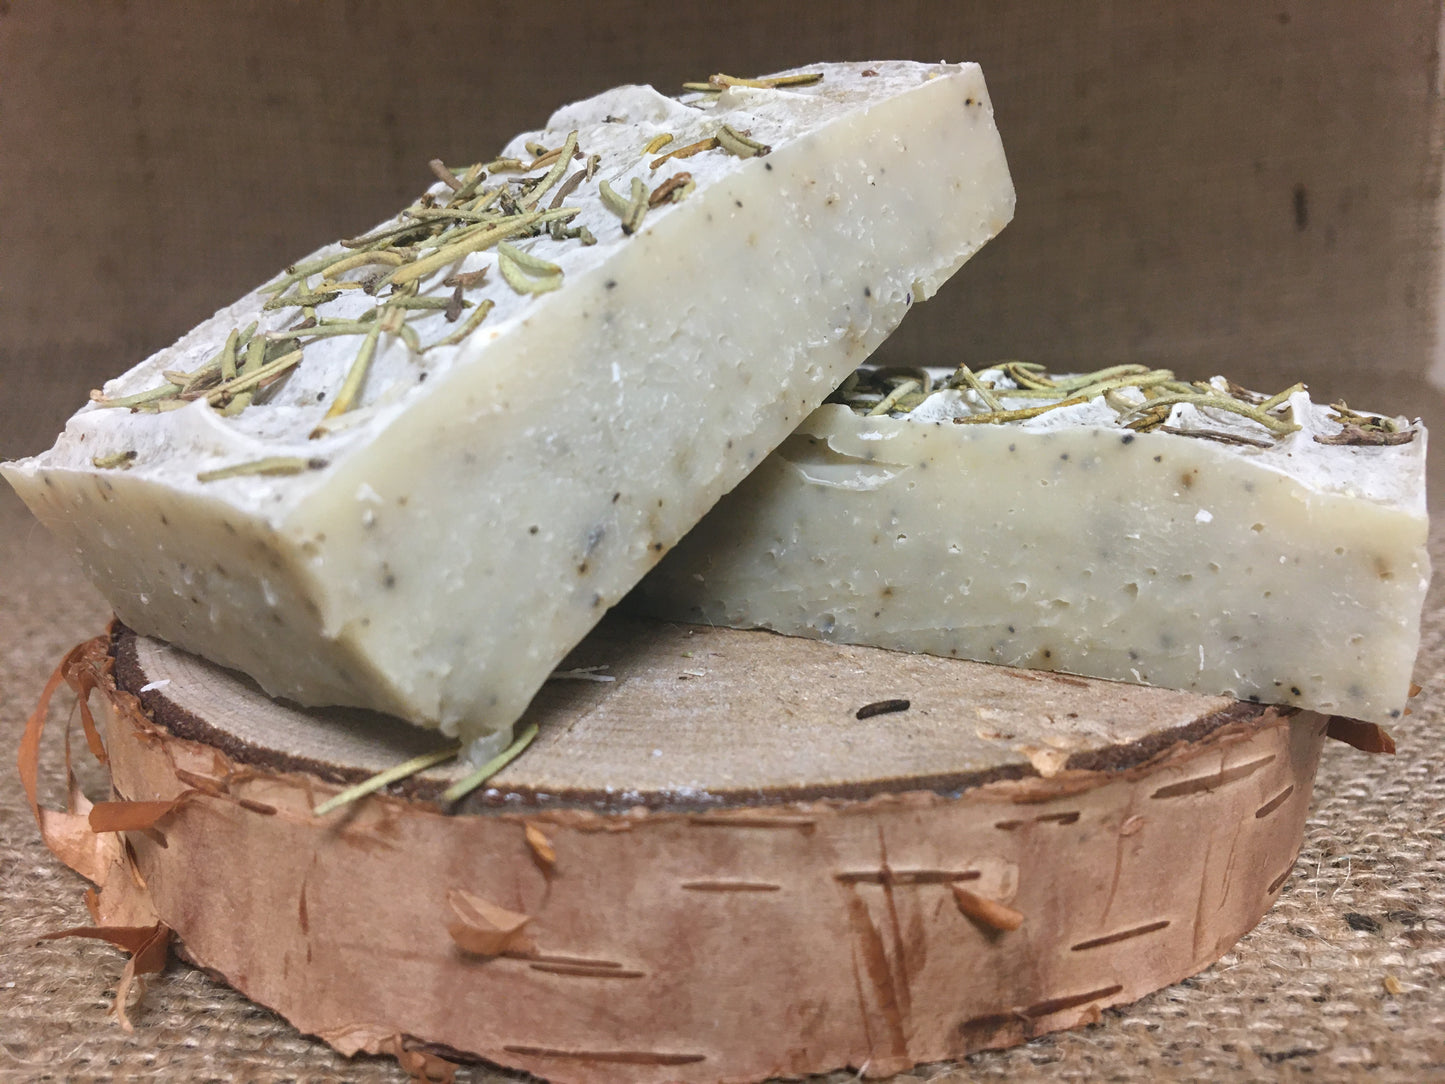 Rosemary and Sage Soap two bar with side view